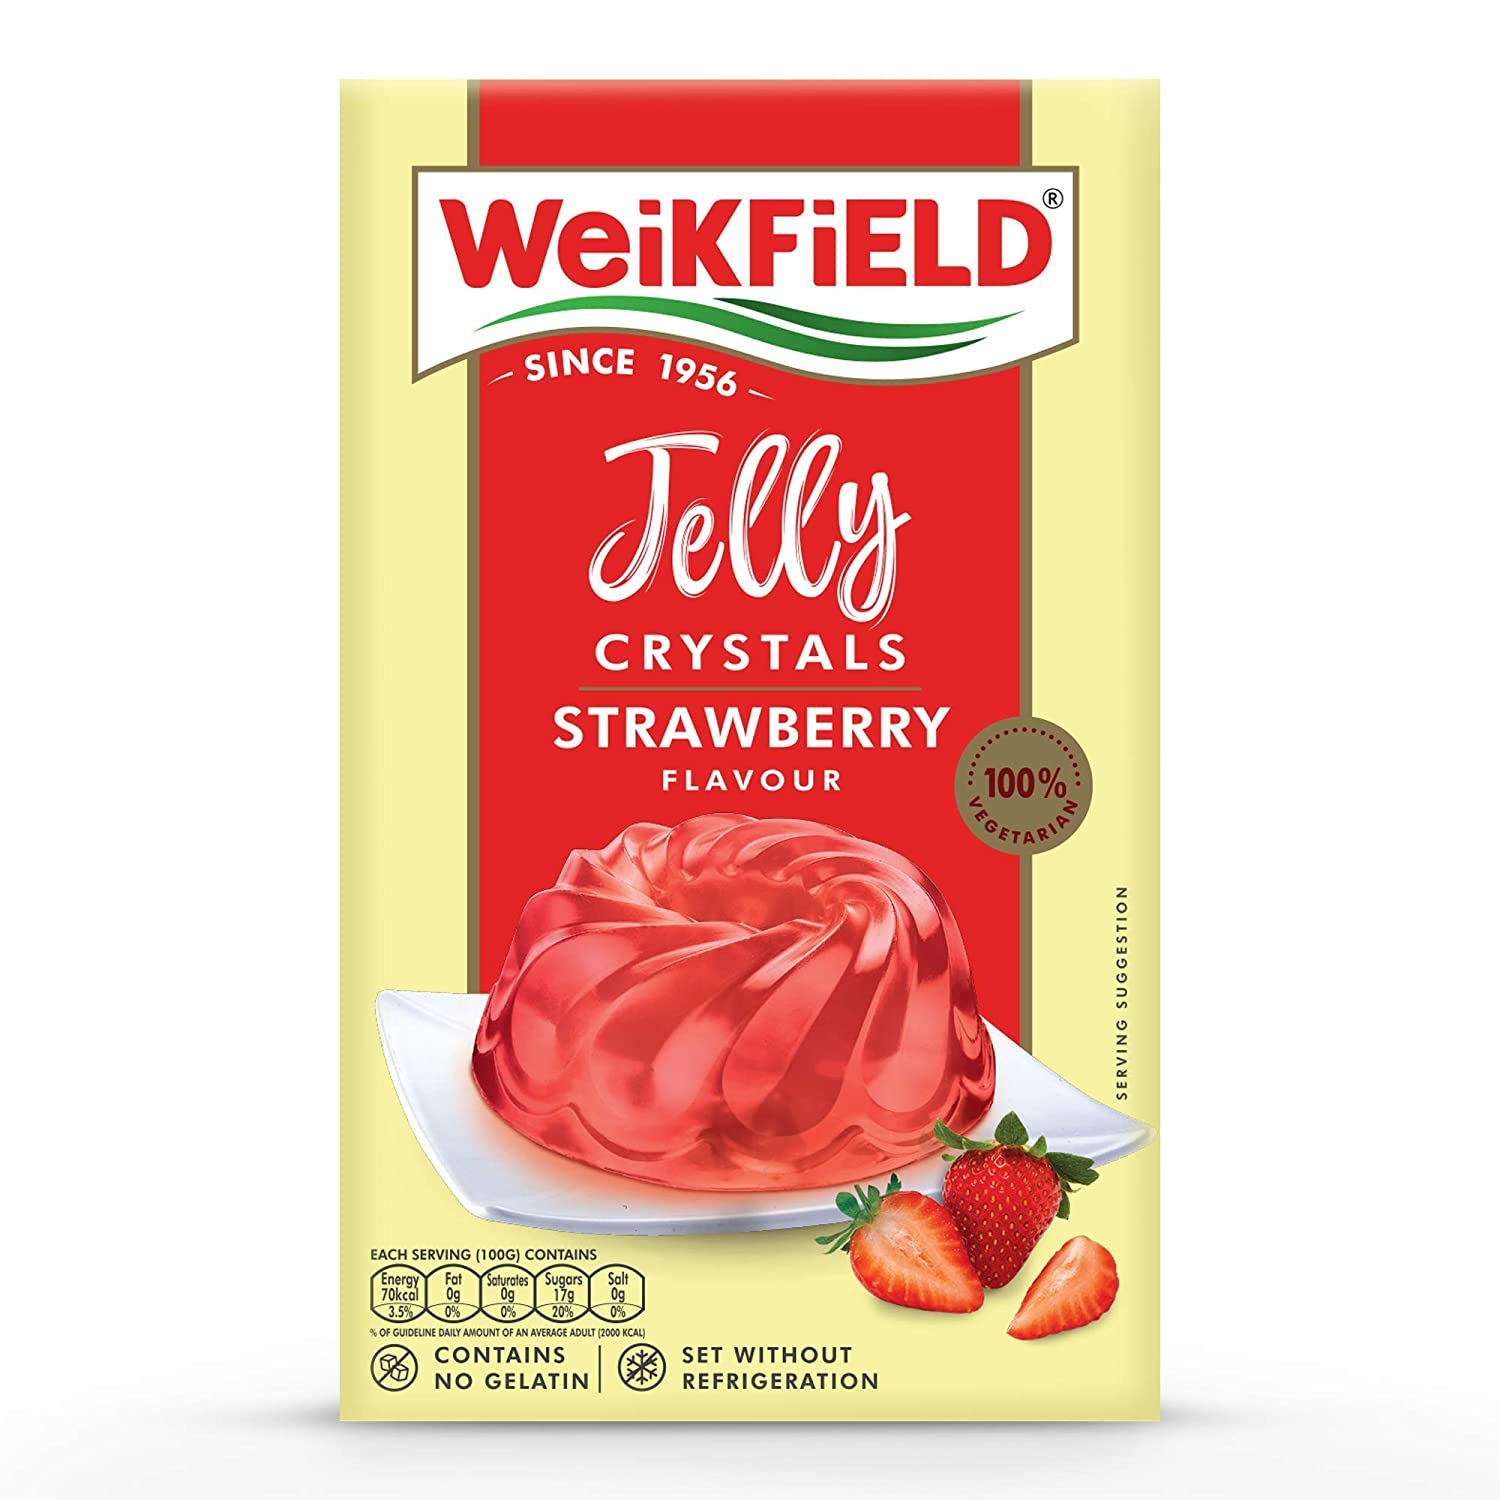 Weikfield Jelly Crystals Strawberry Image